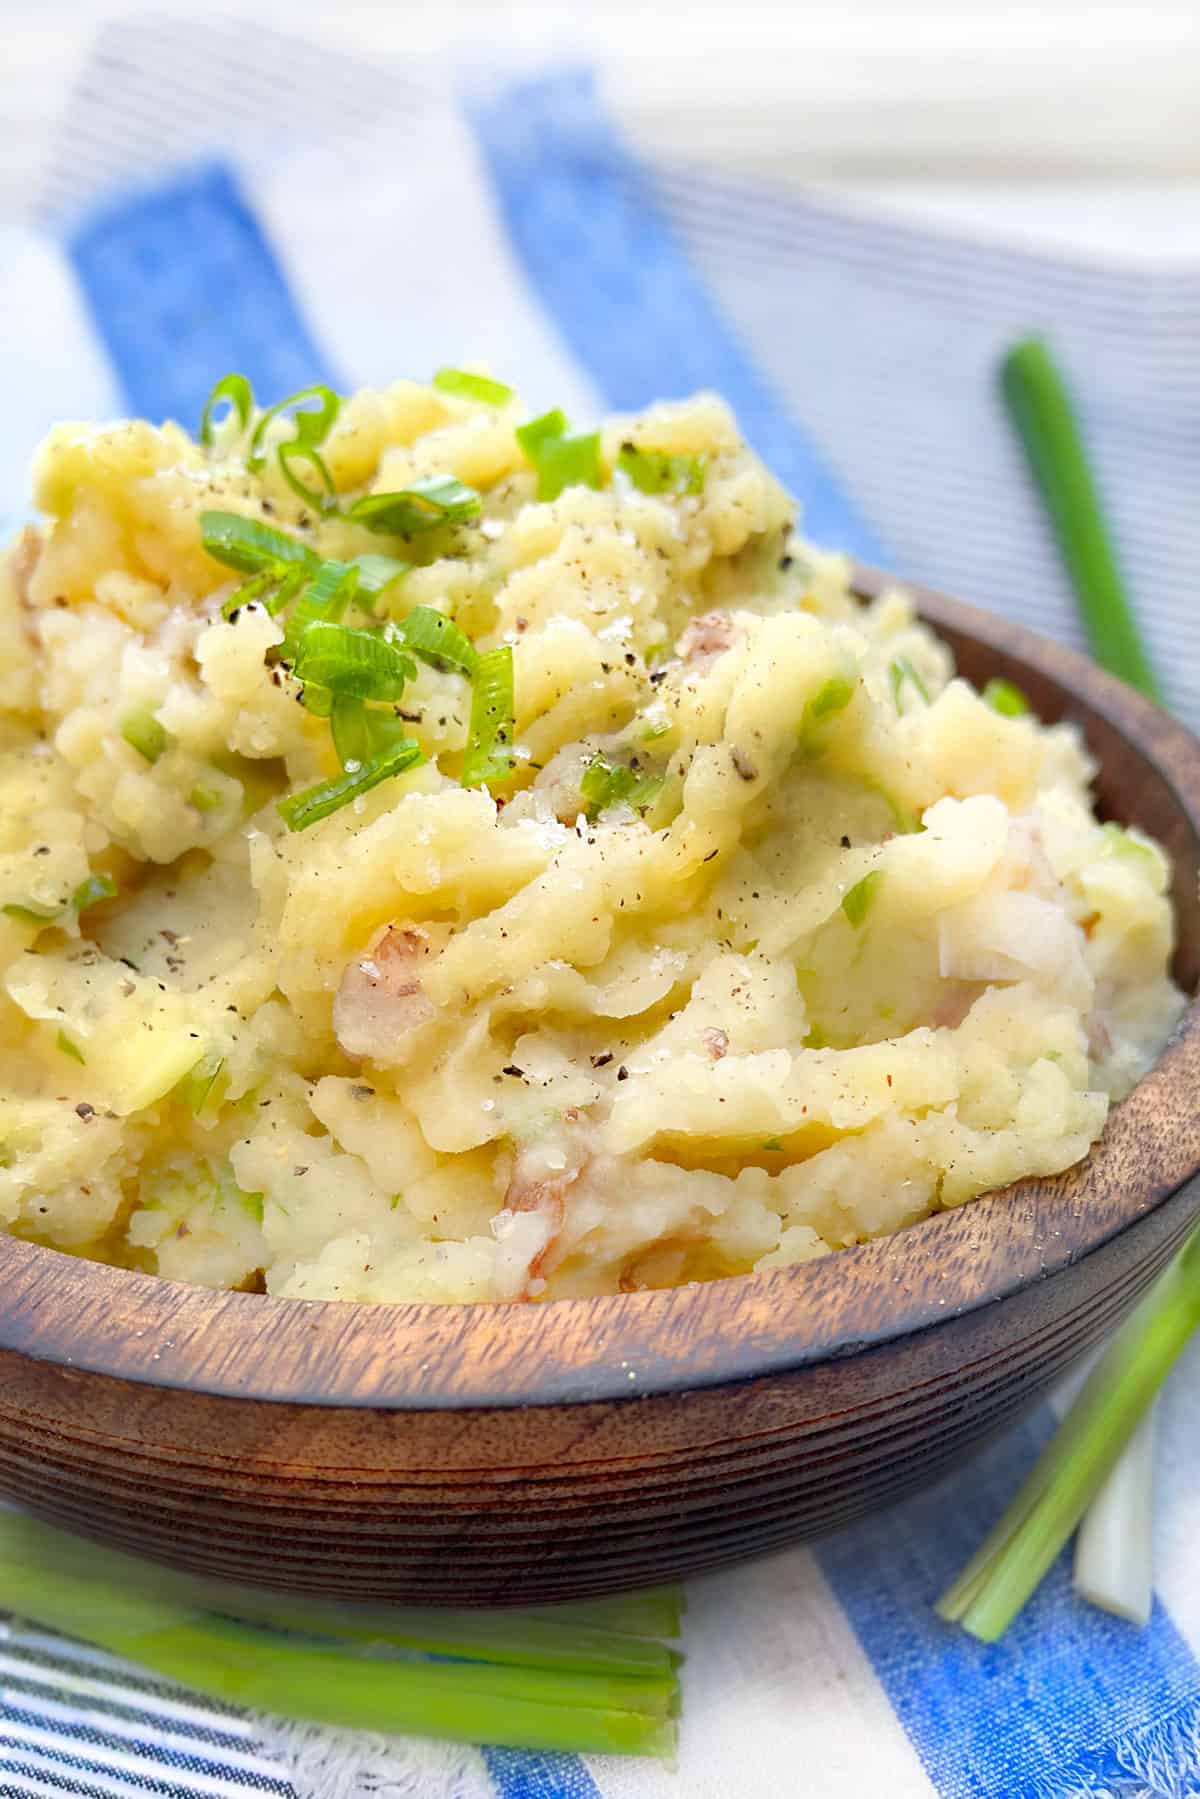 mashed red skin potatoes with their skin, in a brown wooden serving bowl, topped with chopped scallions and black pepper.